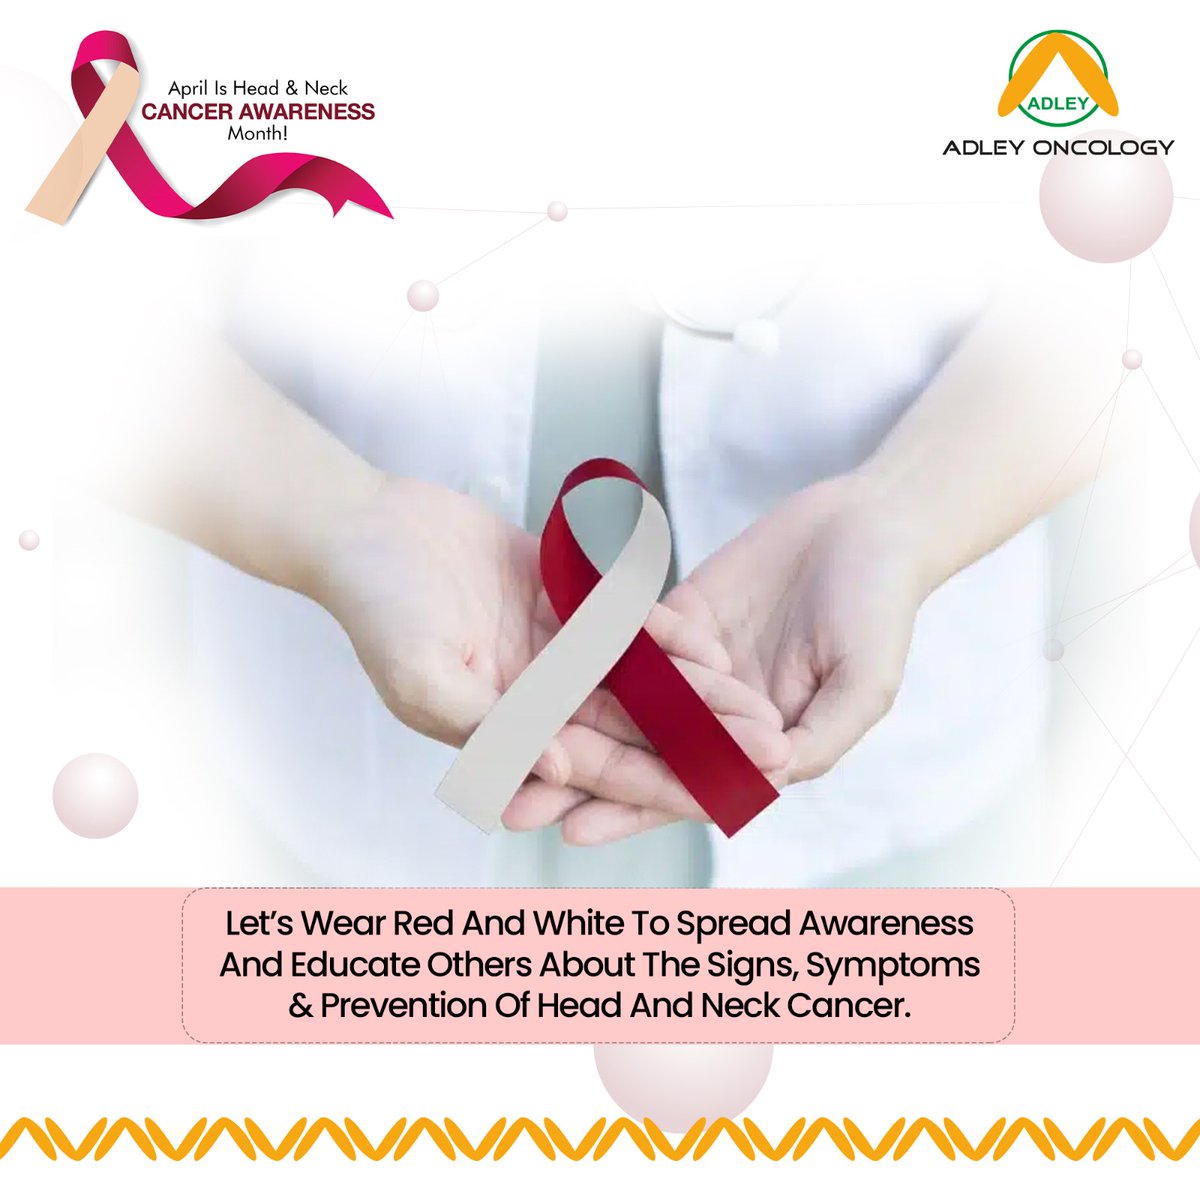 In April, let's join hands for Head & Neck Cancer Awareness Month!  Wear the colors red and white to symbolize hope and awareness.

Visit our website:
betadrugslimited.com

#adleyoncology #KnowTheSigns #SpreadAwareness #EarlyDetectionSavesLives #NeverLoseHope #HealthyHabits